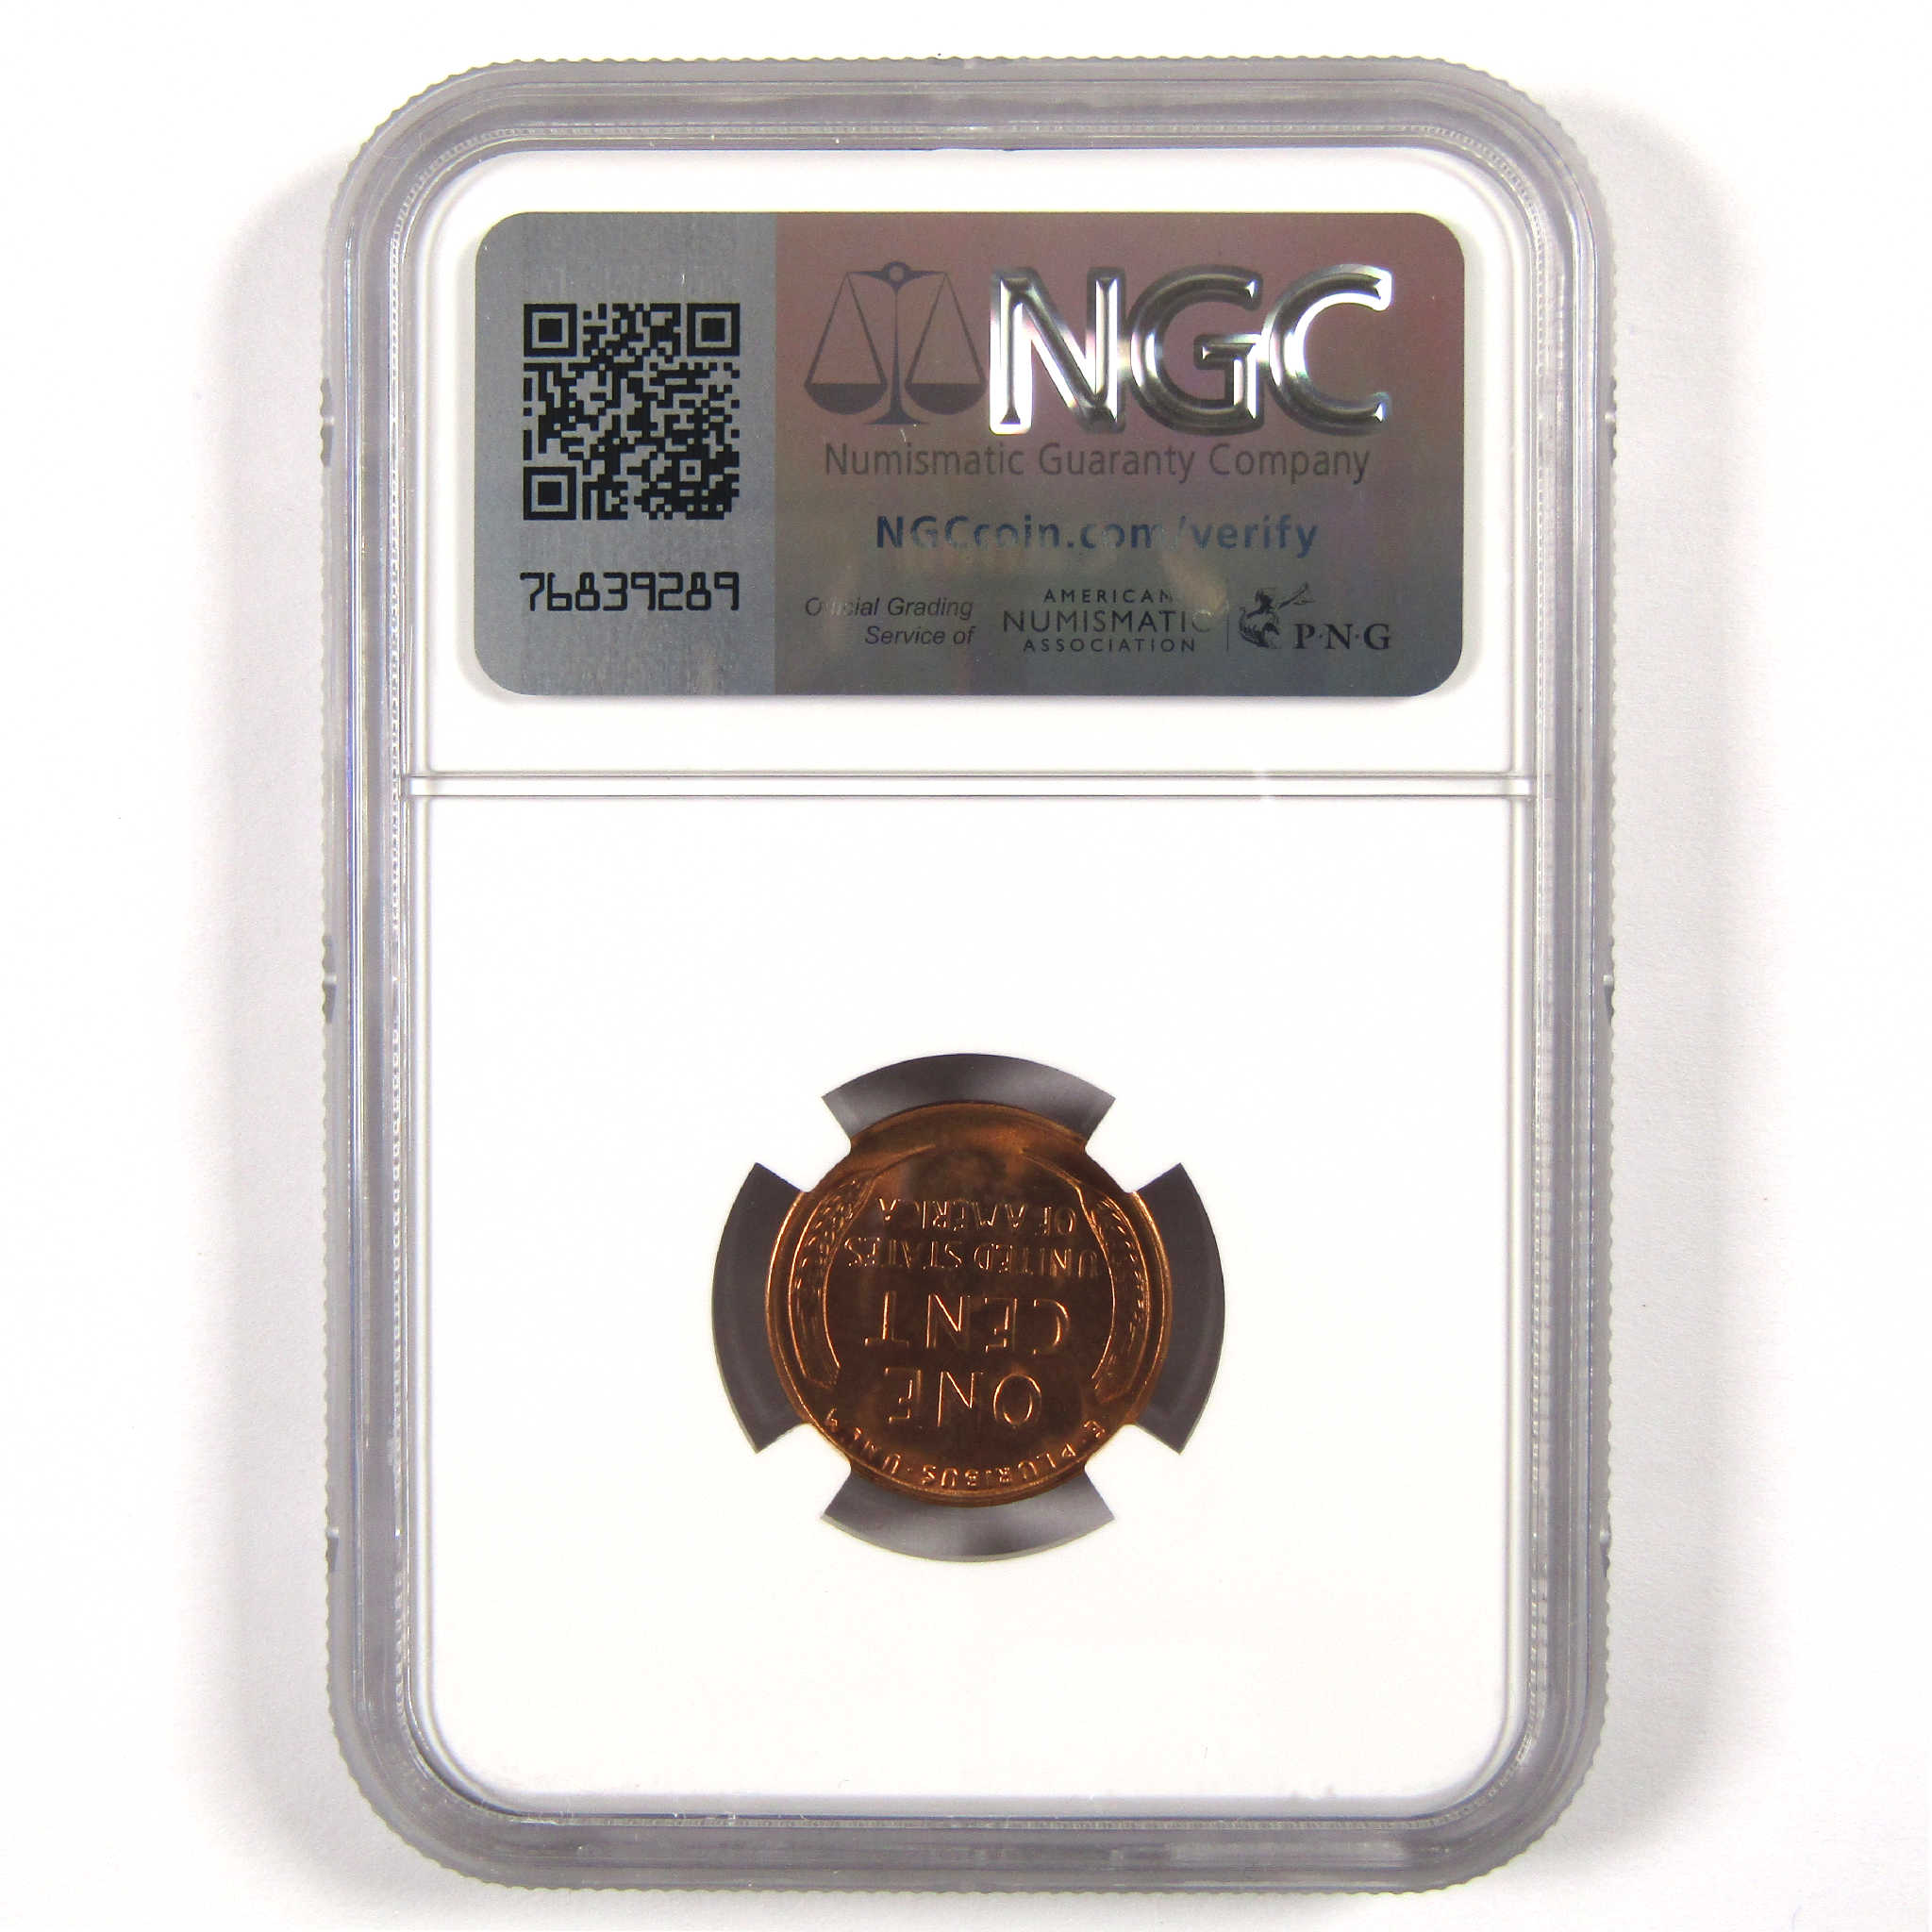 1954 S Lincoln Wheat Cent MS 66 RD NGC Penny 1c Unc SKU:I11580